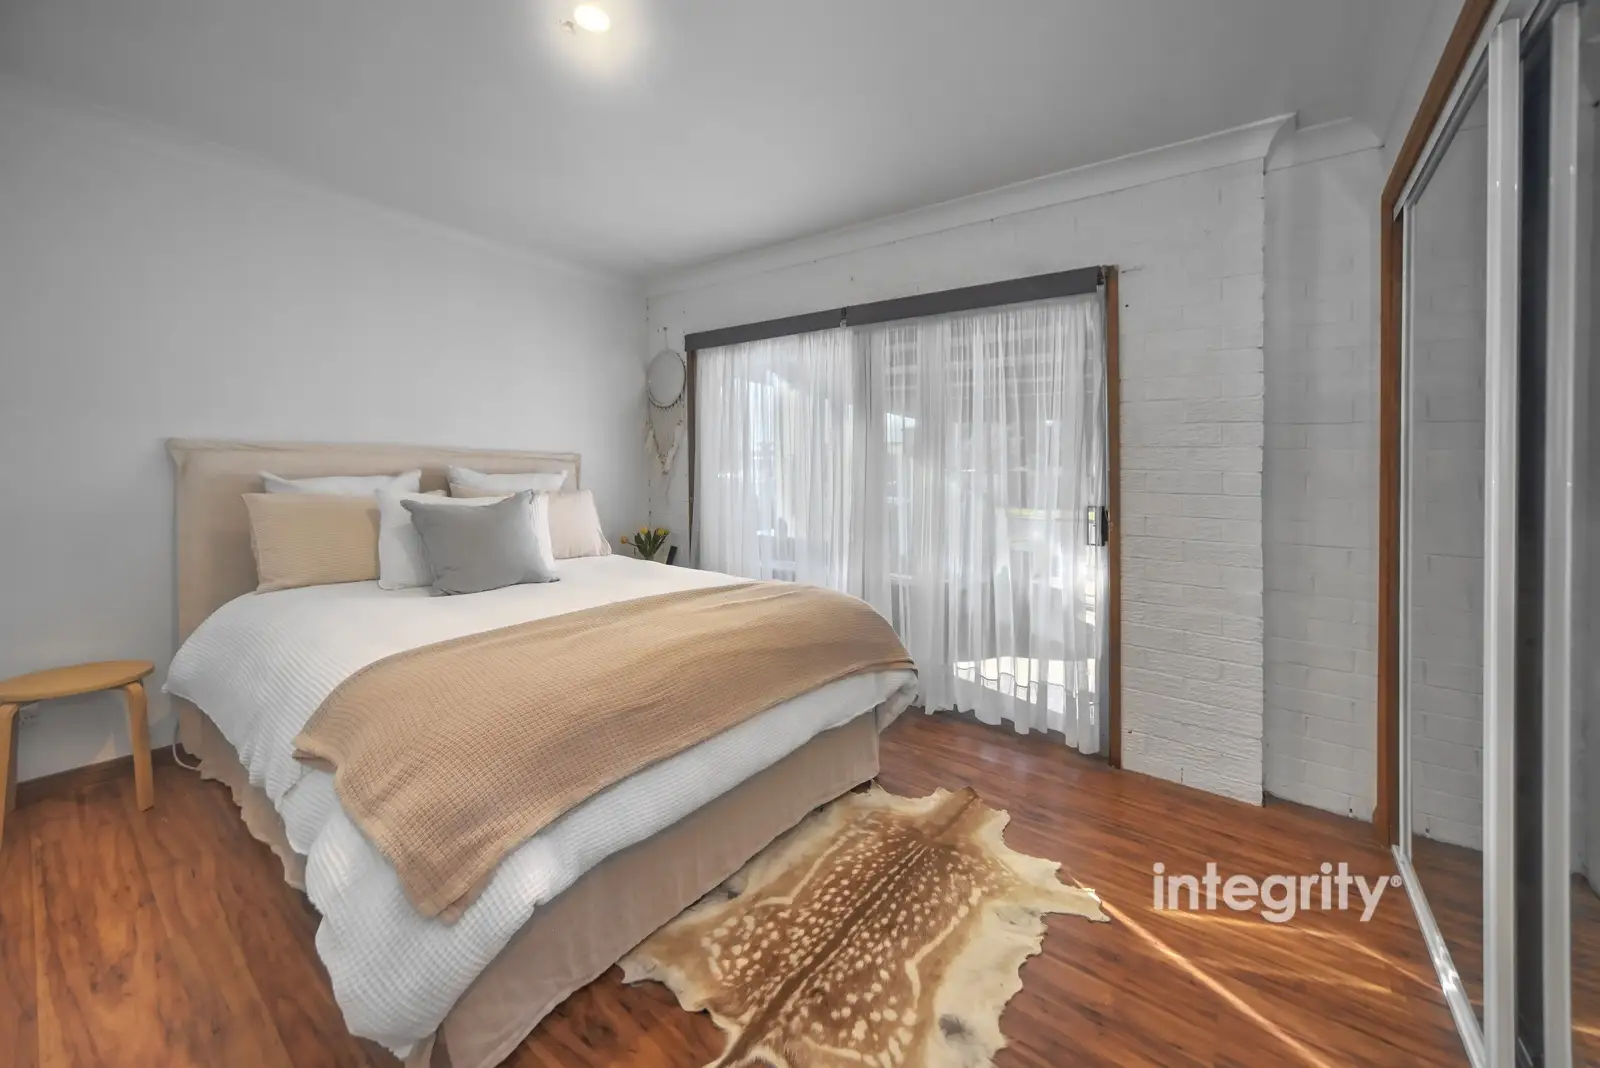 21 Haiser Road, Greenwell Point For Sale by Integrity Real Estate - image 6